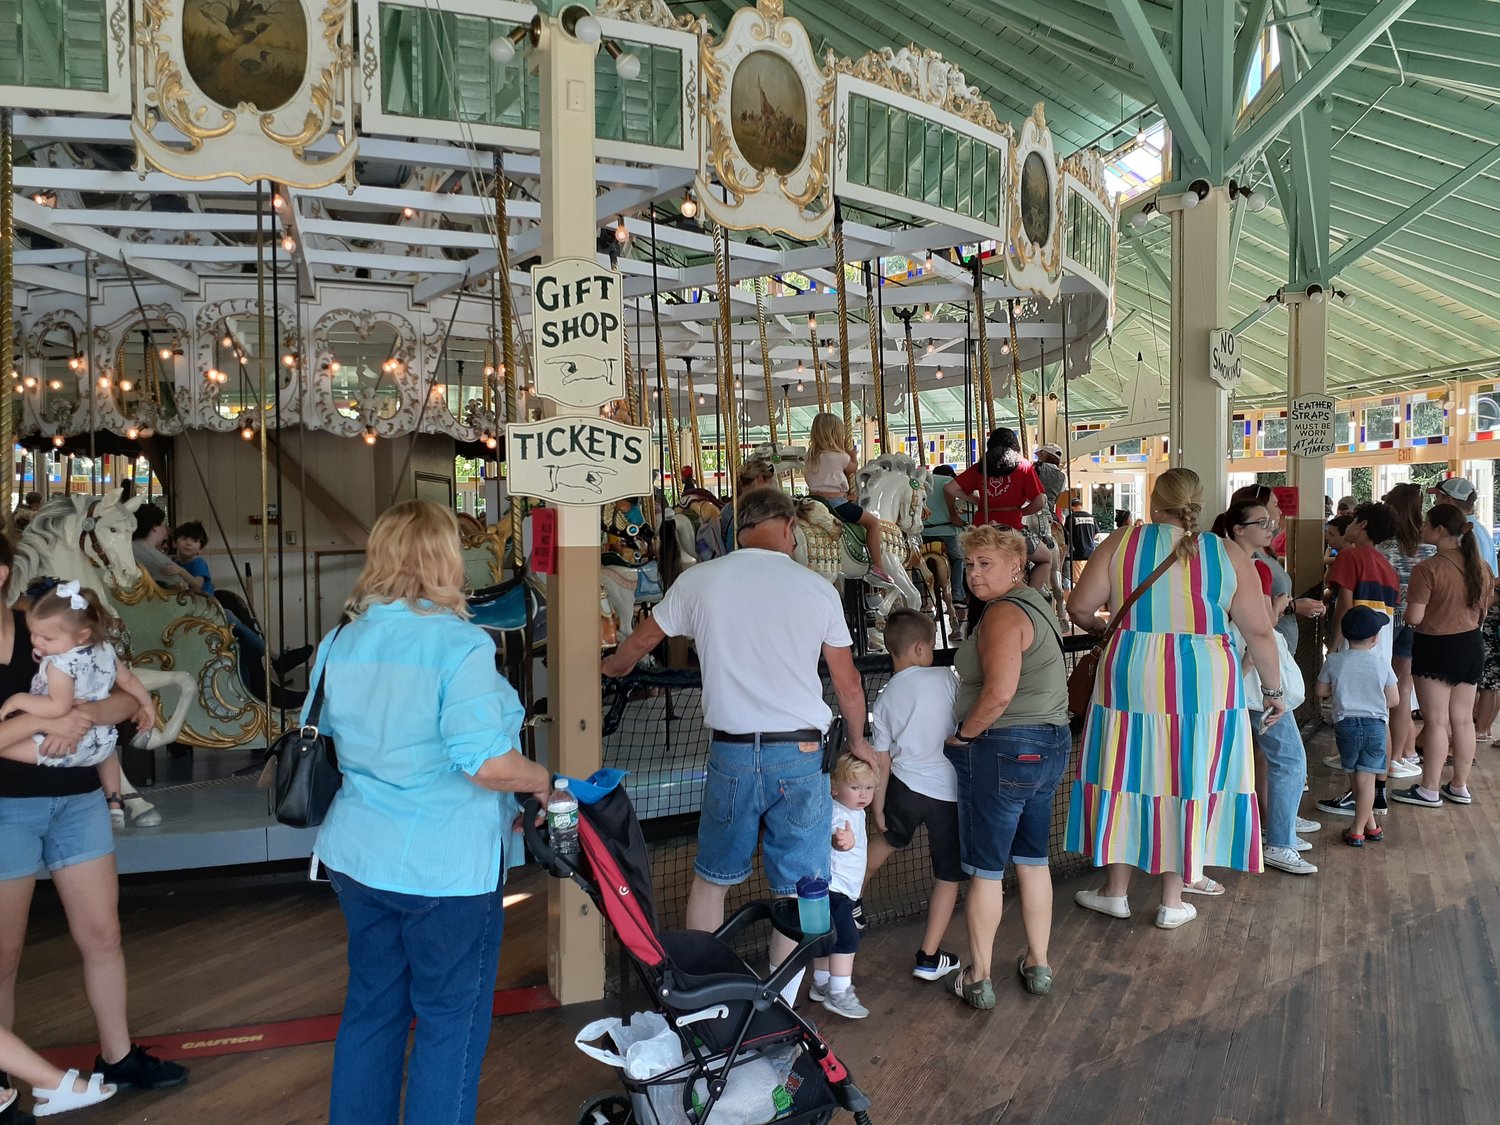 Fans of the Looff Carousel line up for a long anticipated ride at Carousel opening. Bob Rodericks photo